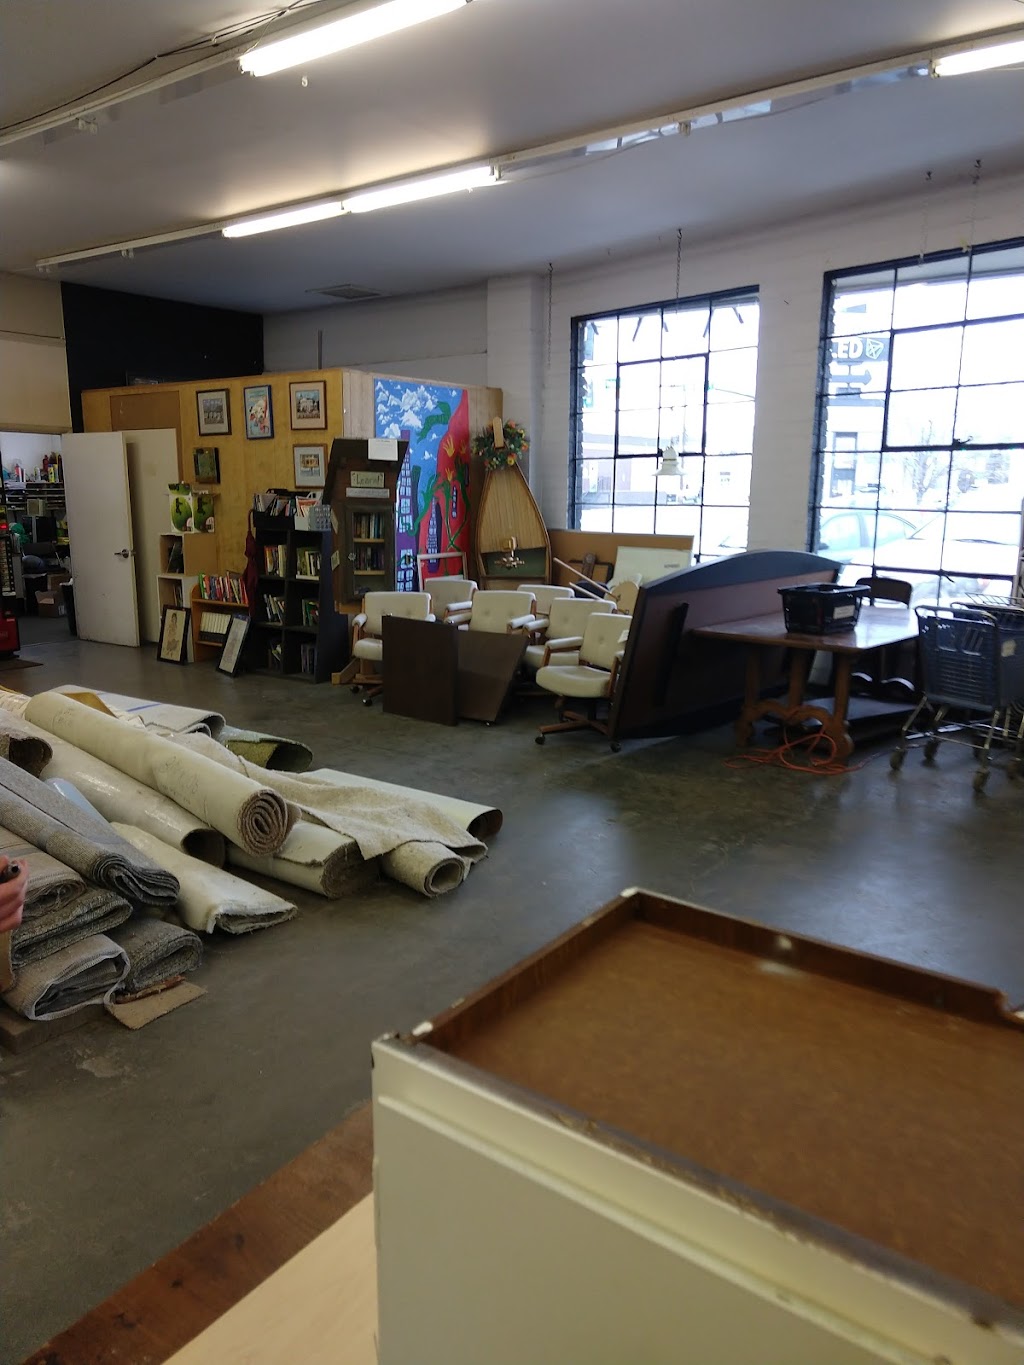 Second Chance Building Materials Center | 1423 W Grove St, Boise, ID 83702, USA | Phone: (208) 331-2707